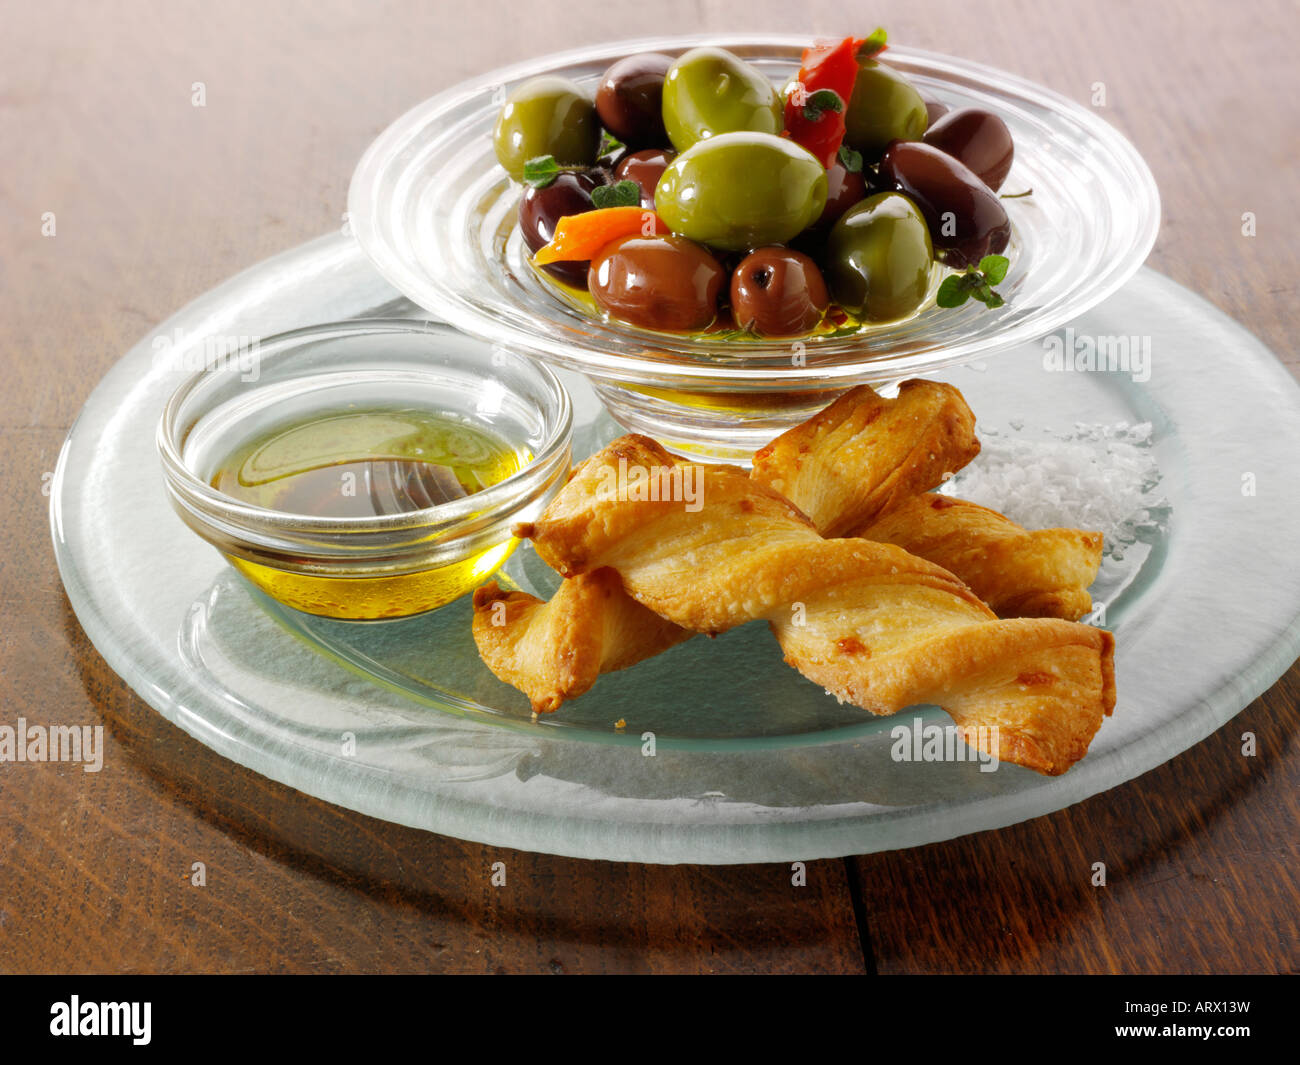 Olives with cheese straws and olive oil dip Stock Photo